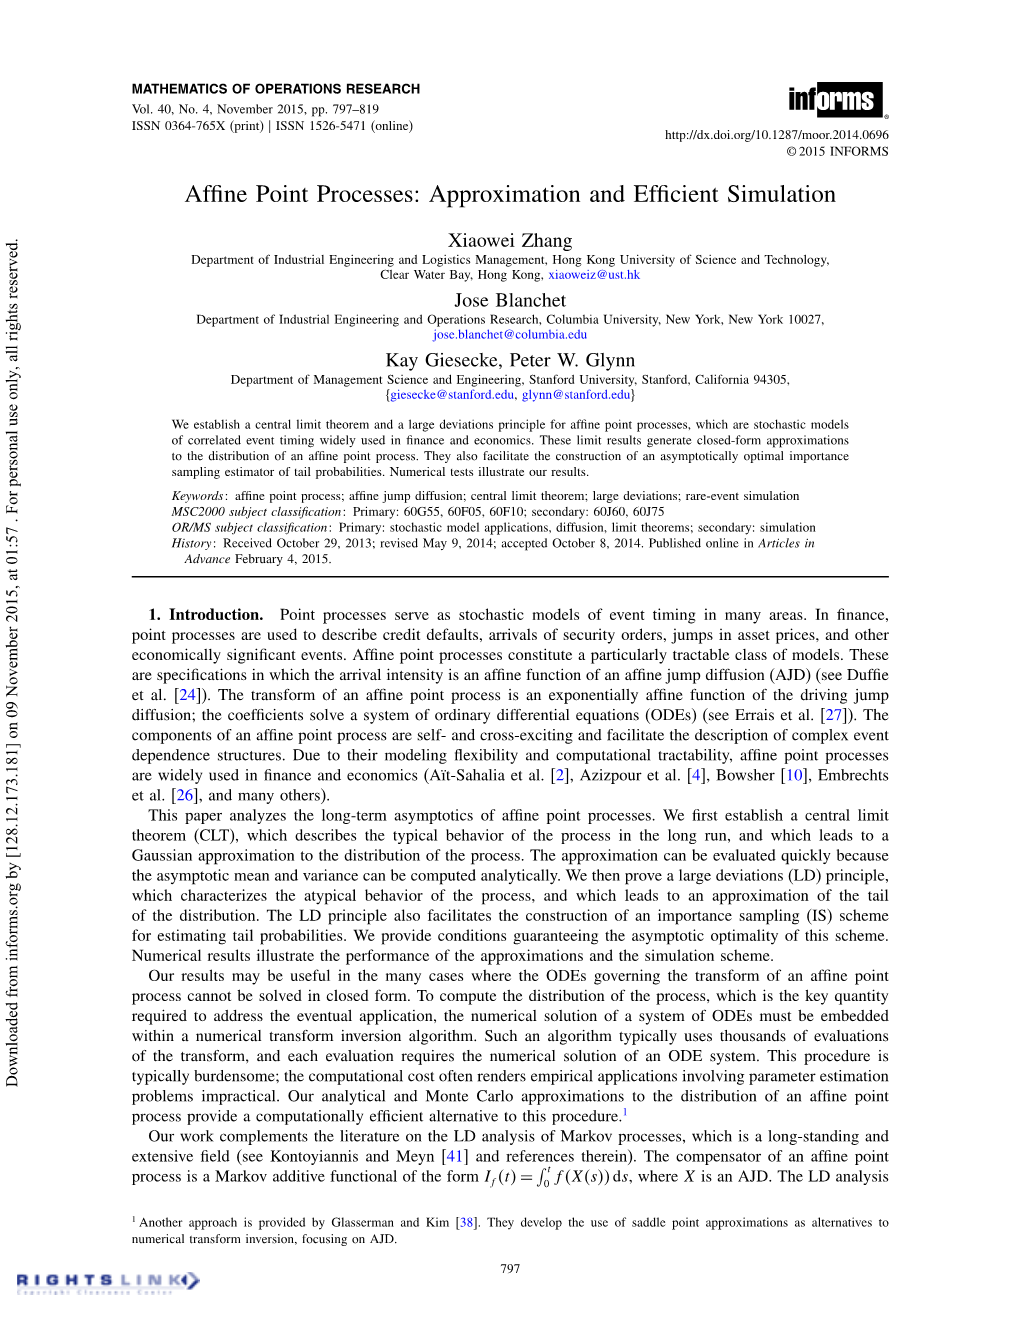 Affine Point Processes: Approximation and Efficient Simulation